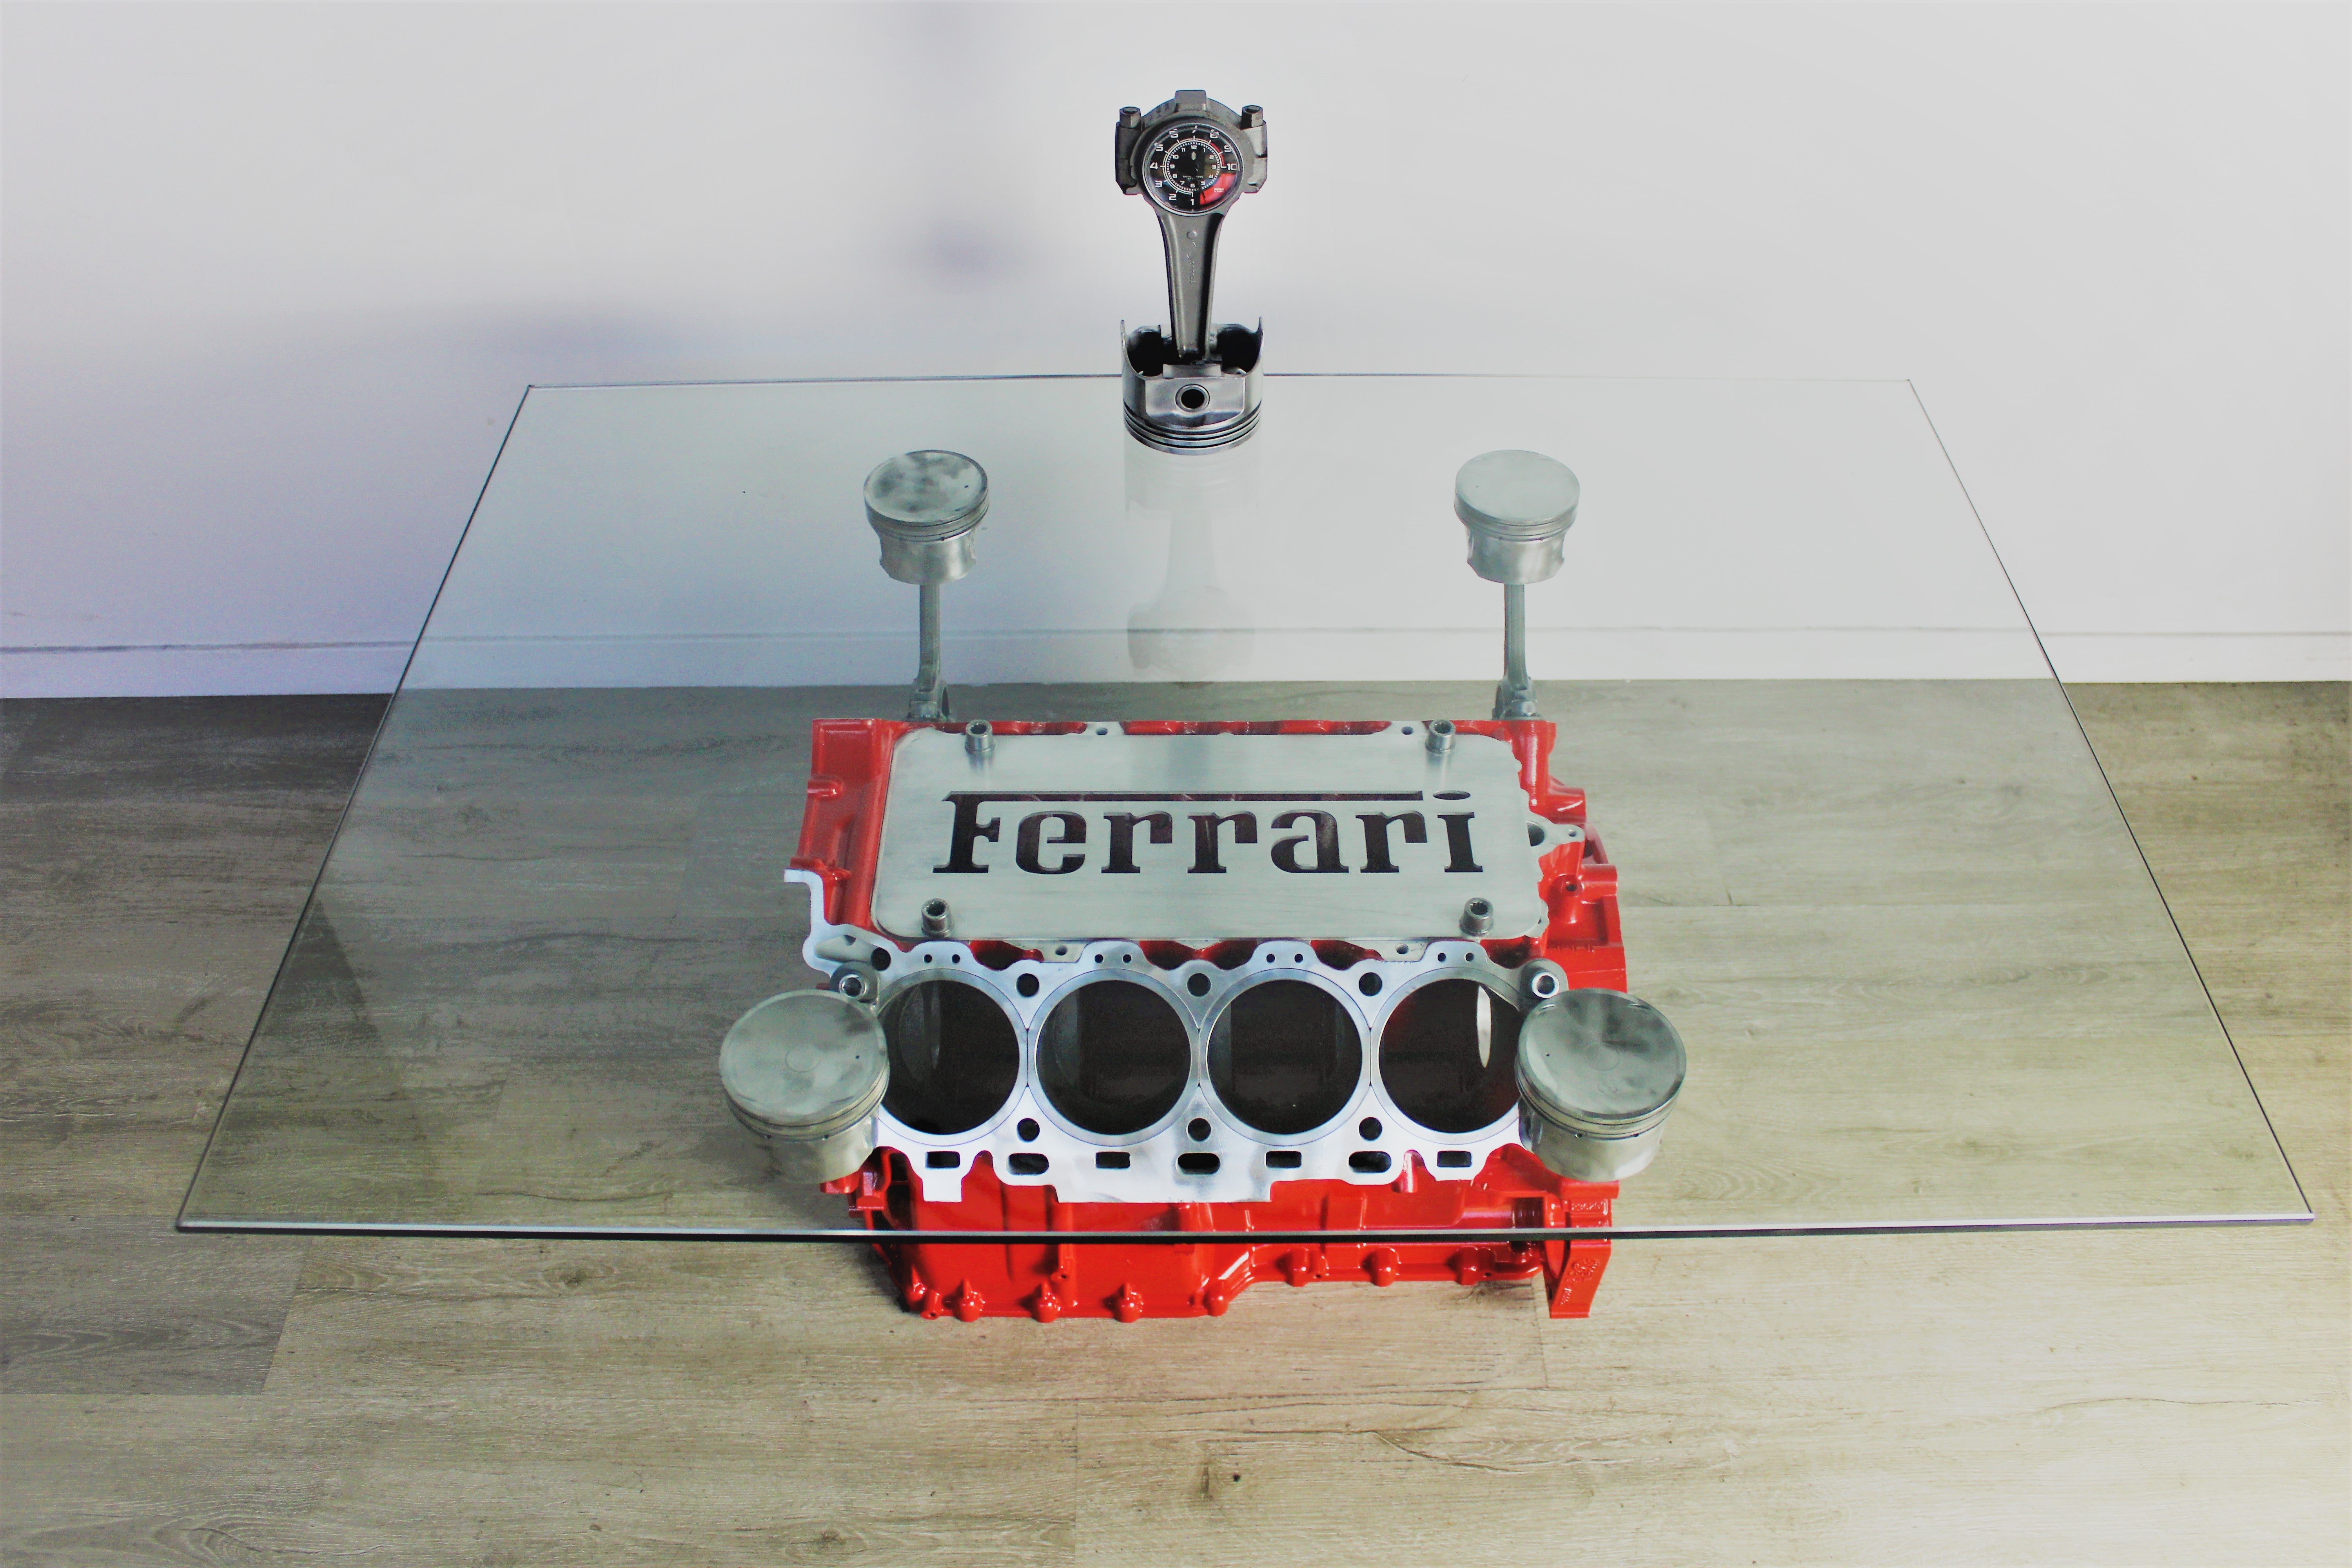 Ferrari engine block coffee table finished in red with a square glass top, the Ferrari logo displayed in the center and a car piston clock on top.